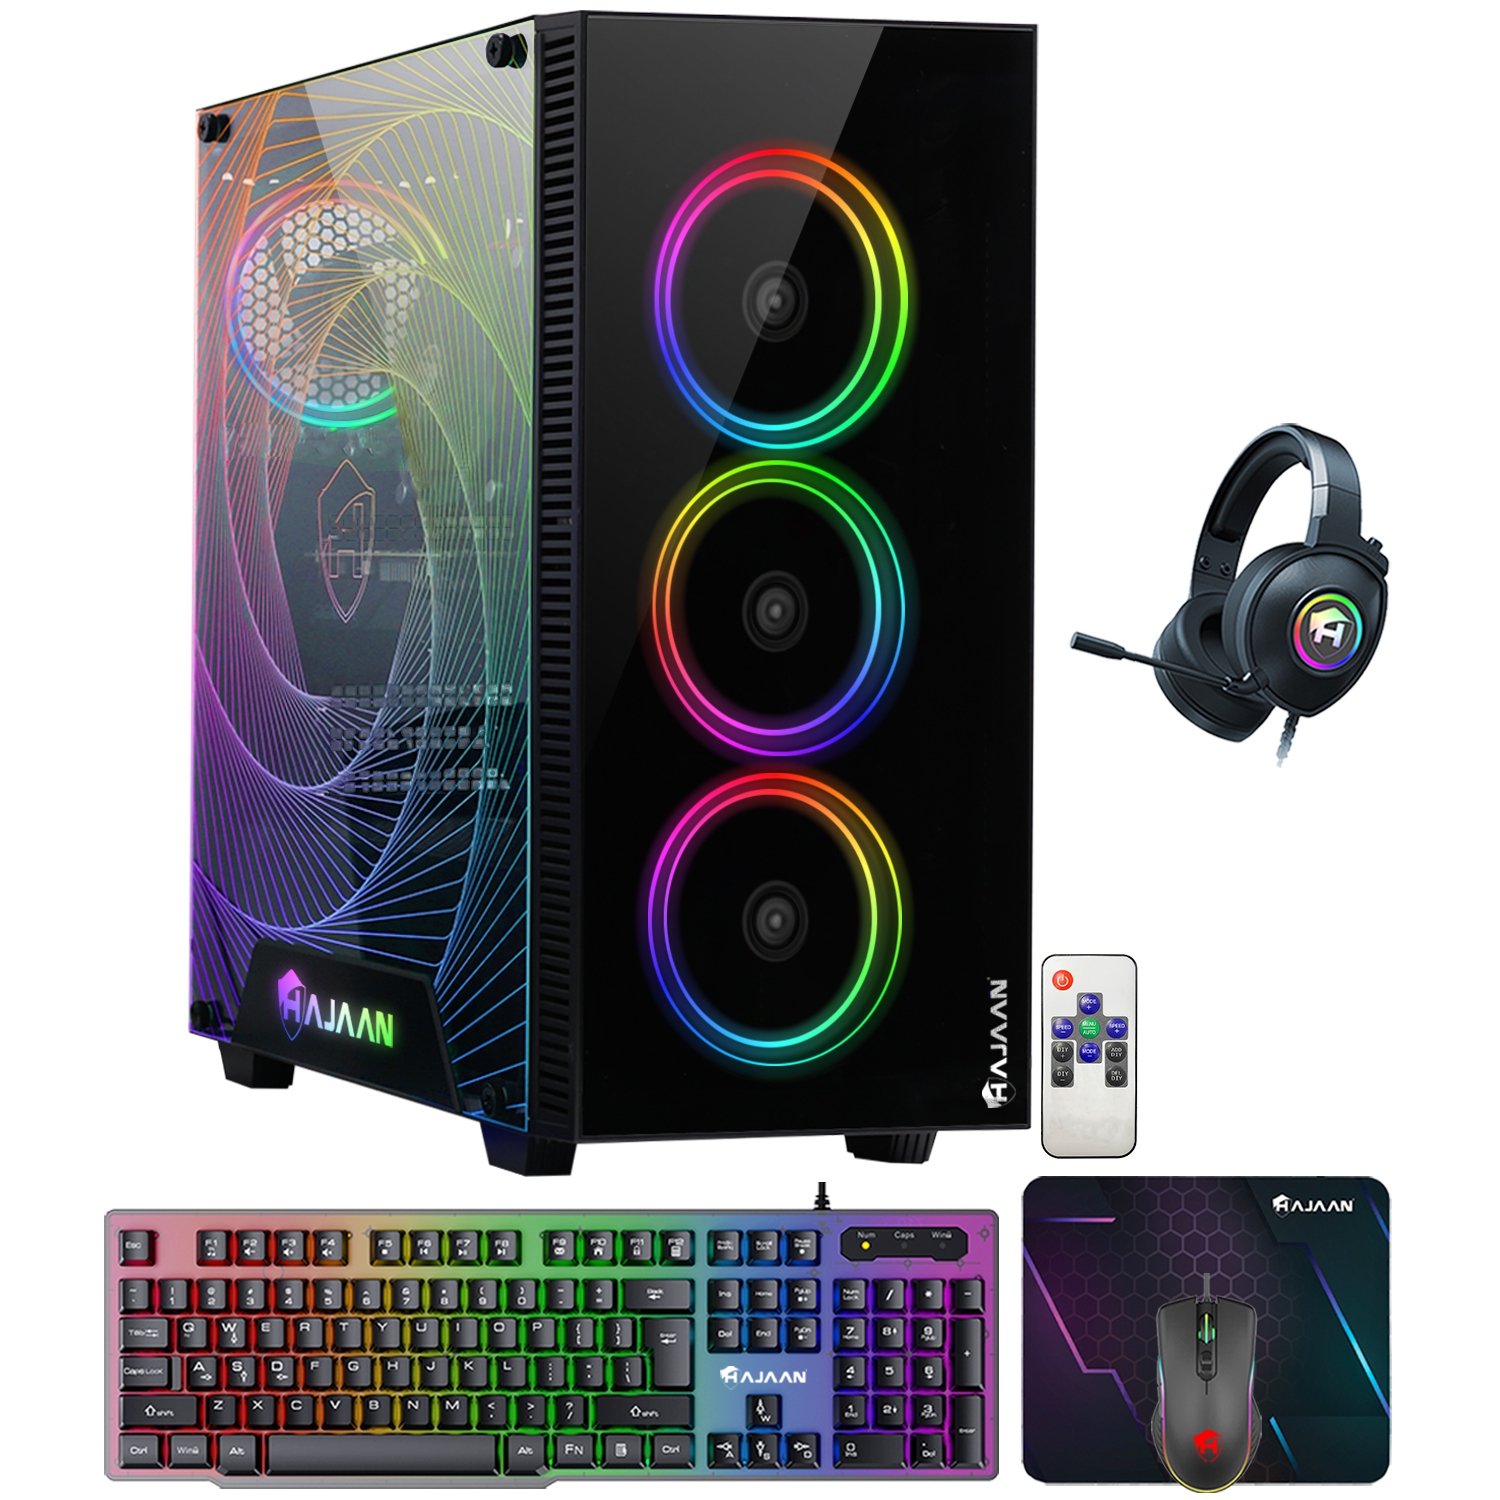 HAJAAN CYCLONIA Gaming Tower Computer Desktop PC - AMD Ryzen 7 5700G Processor Up to 4.6GHz - RTX 3070 8GB GDDR6 - 16GB DDR4 - 1TB SSD - Windows 11 Pro - Keyboard Mouse and Headset